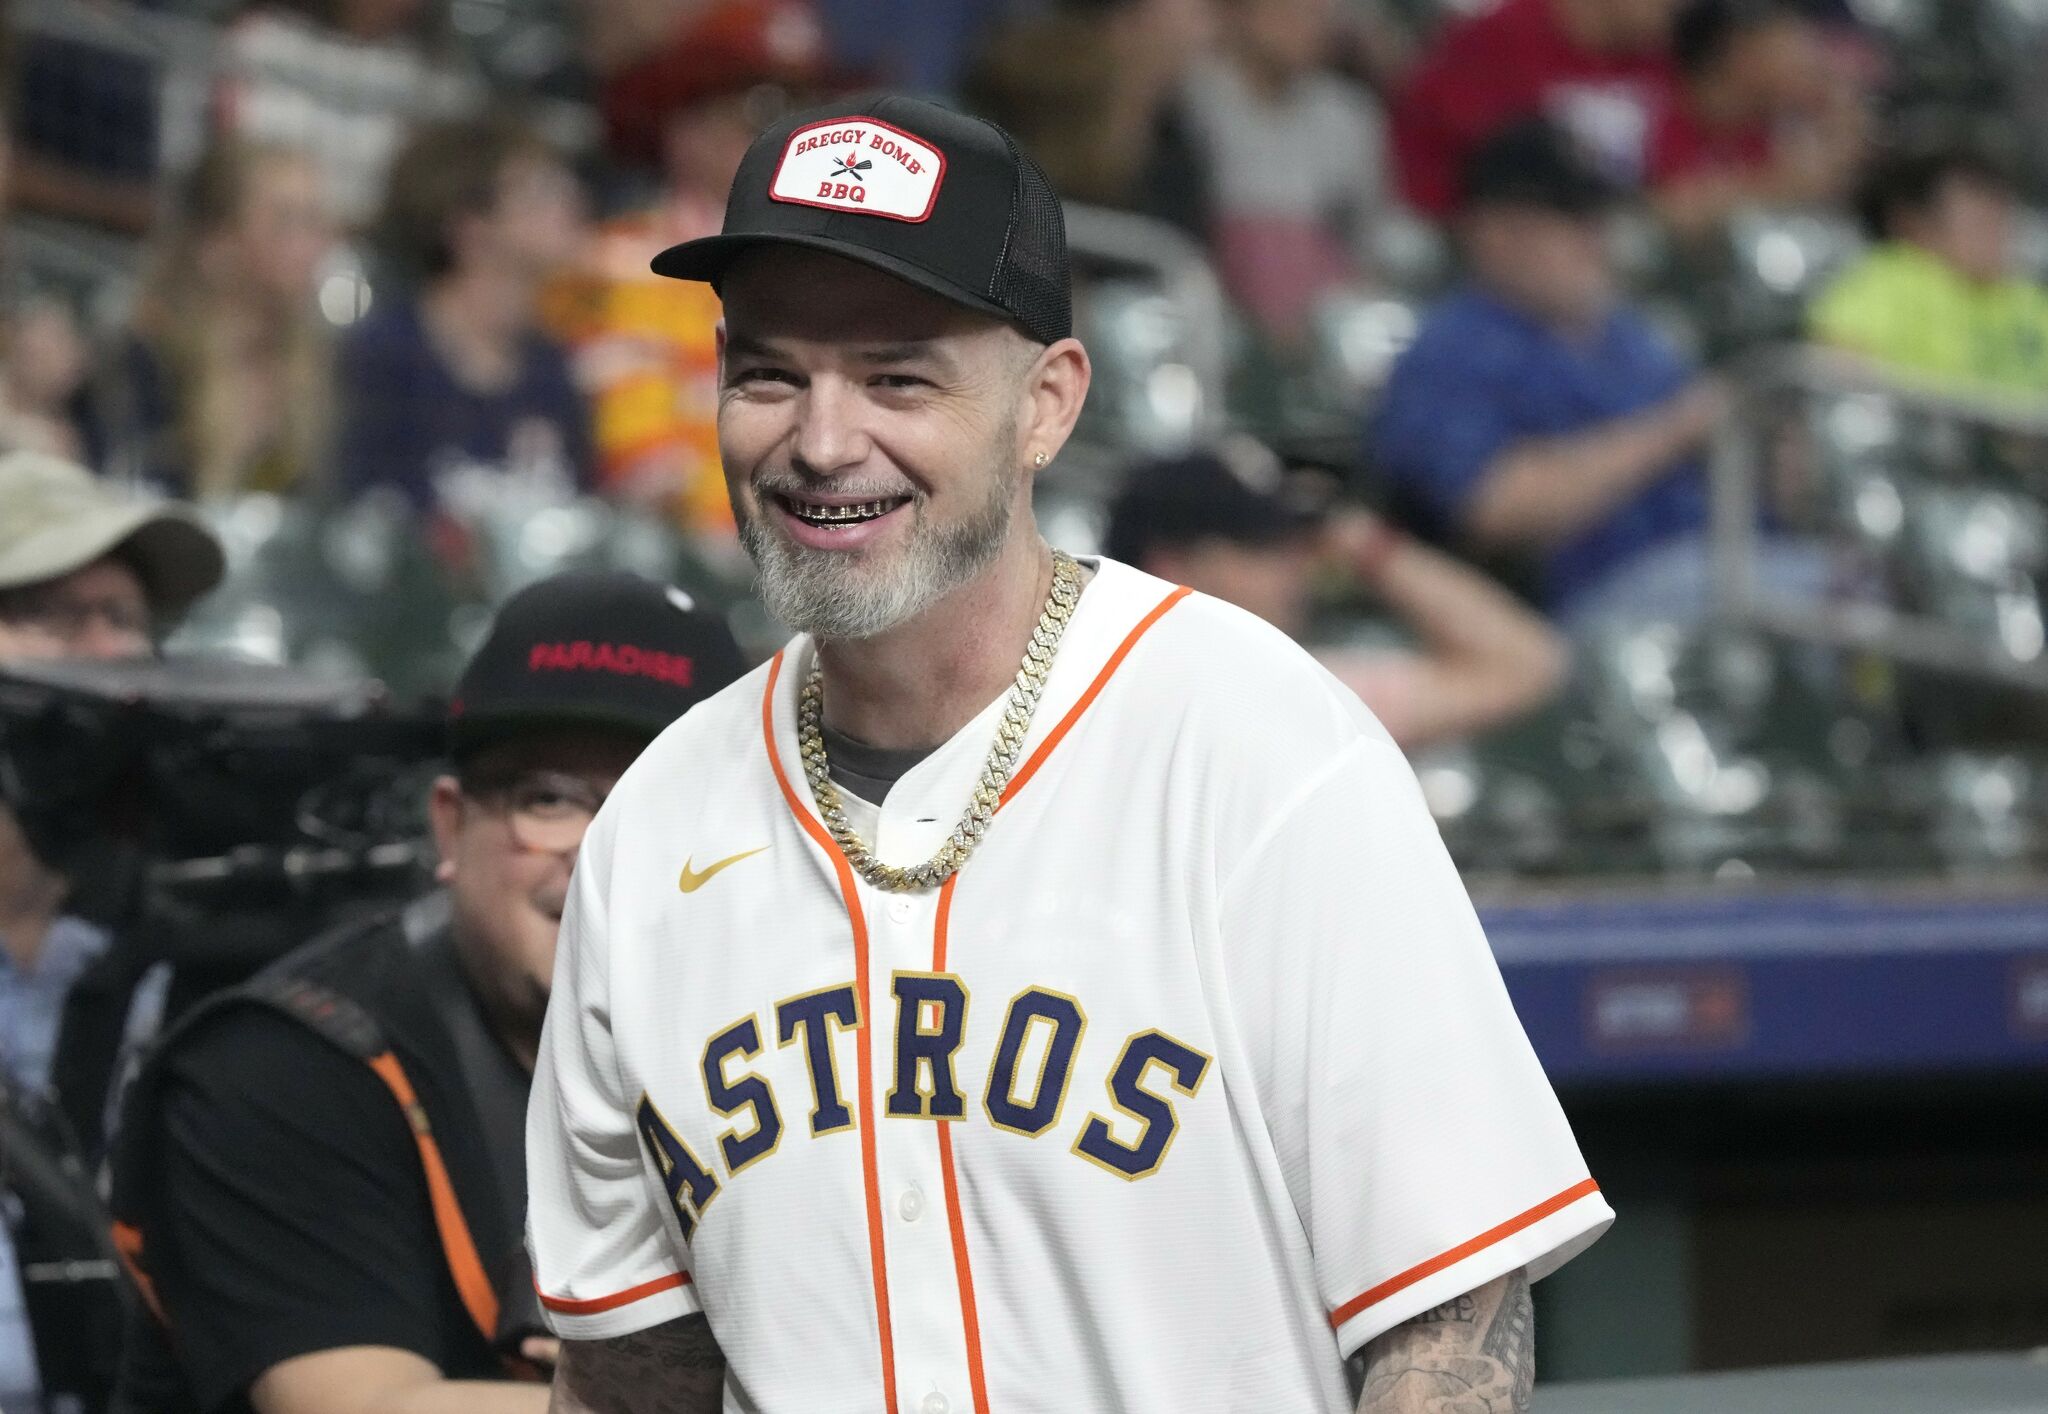 Paul Wall hilariously watched TV replay of Astros game on accident